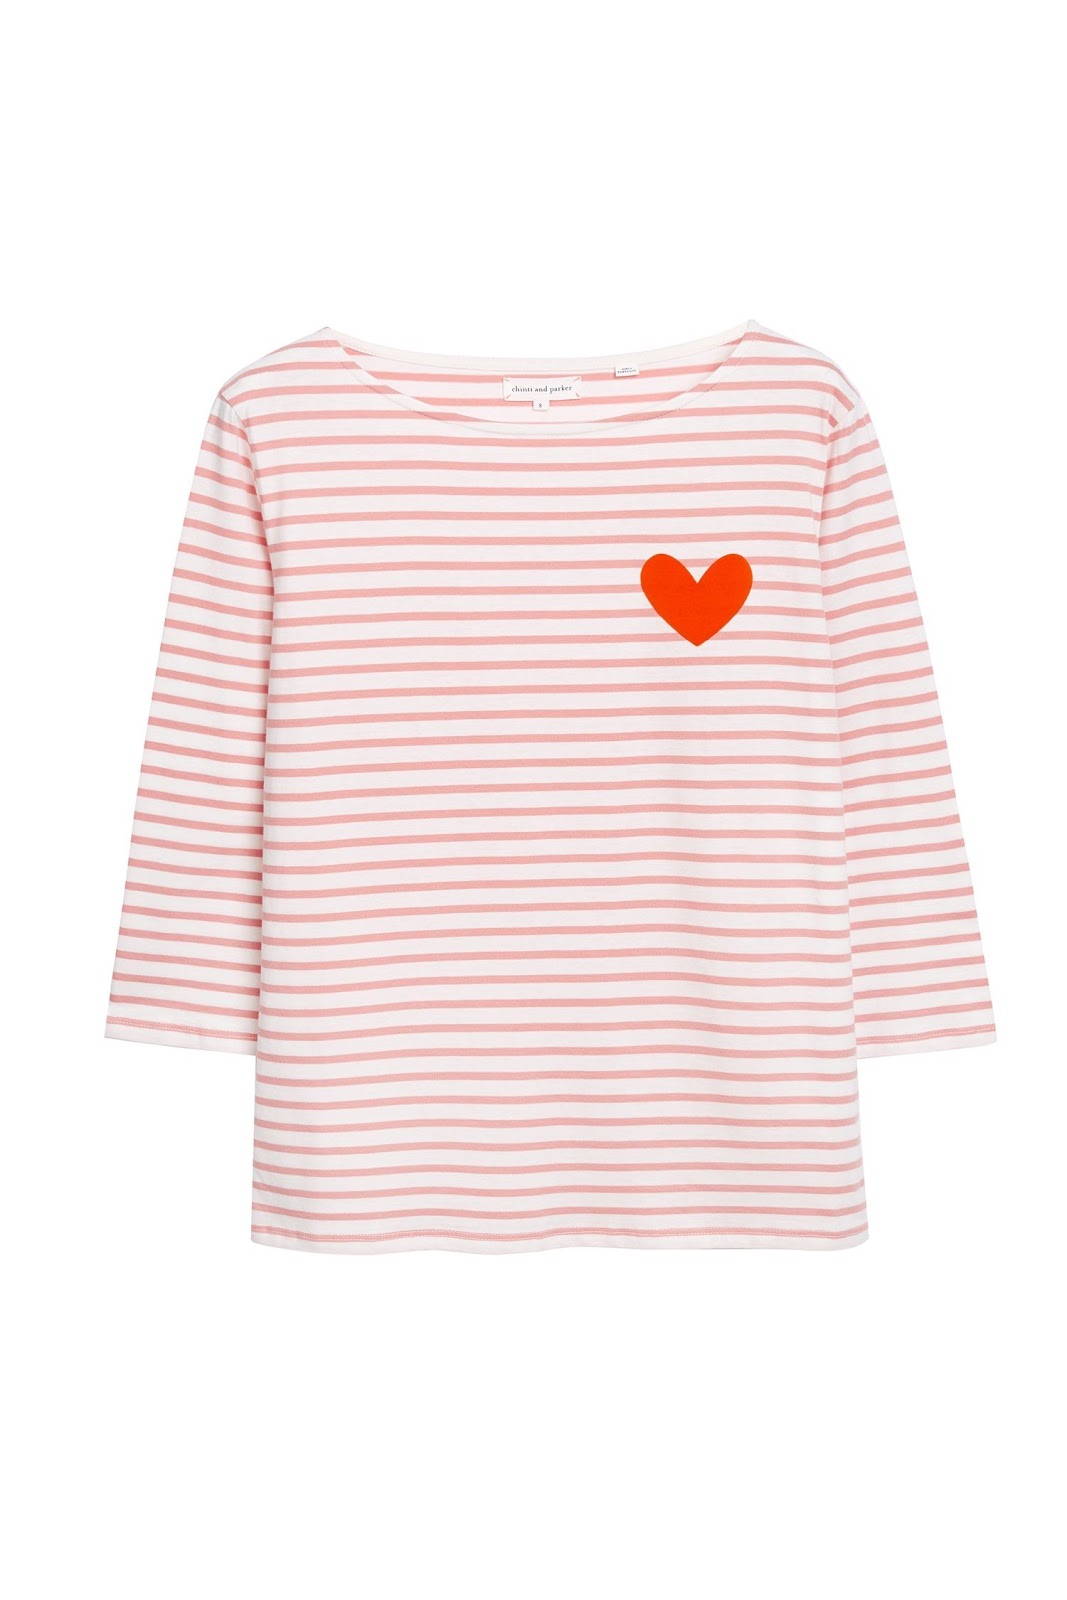 Chinti and parker rose striped velvet heart t shirt